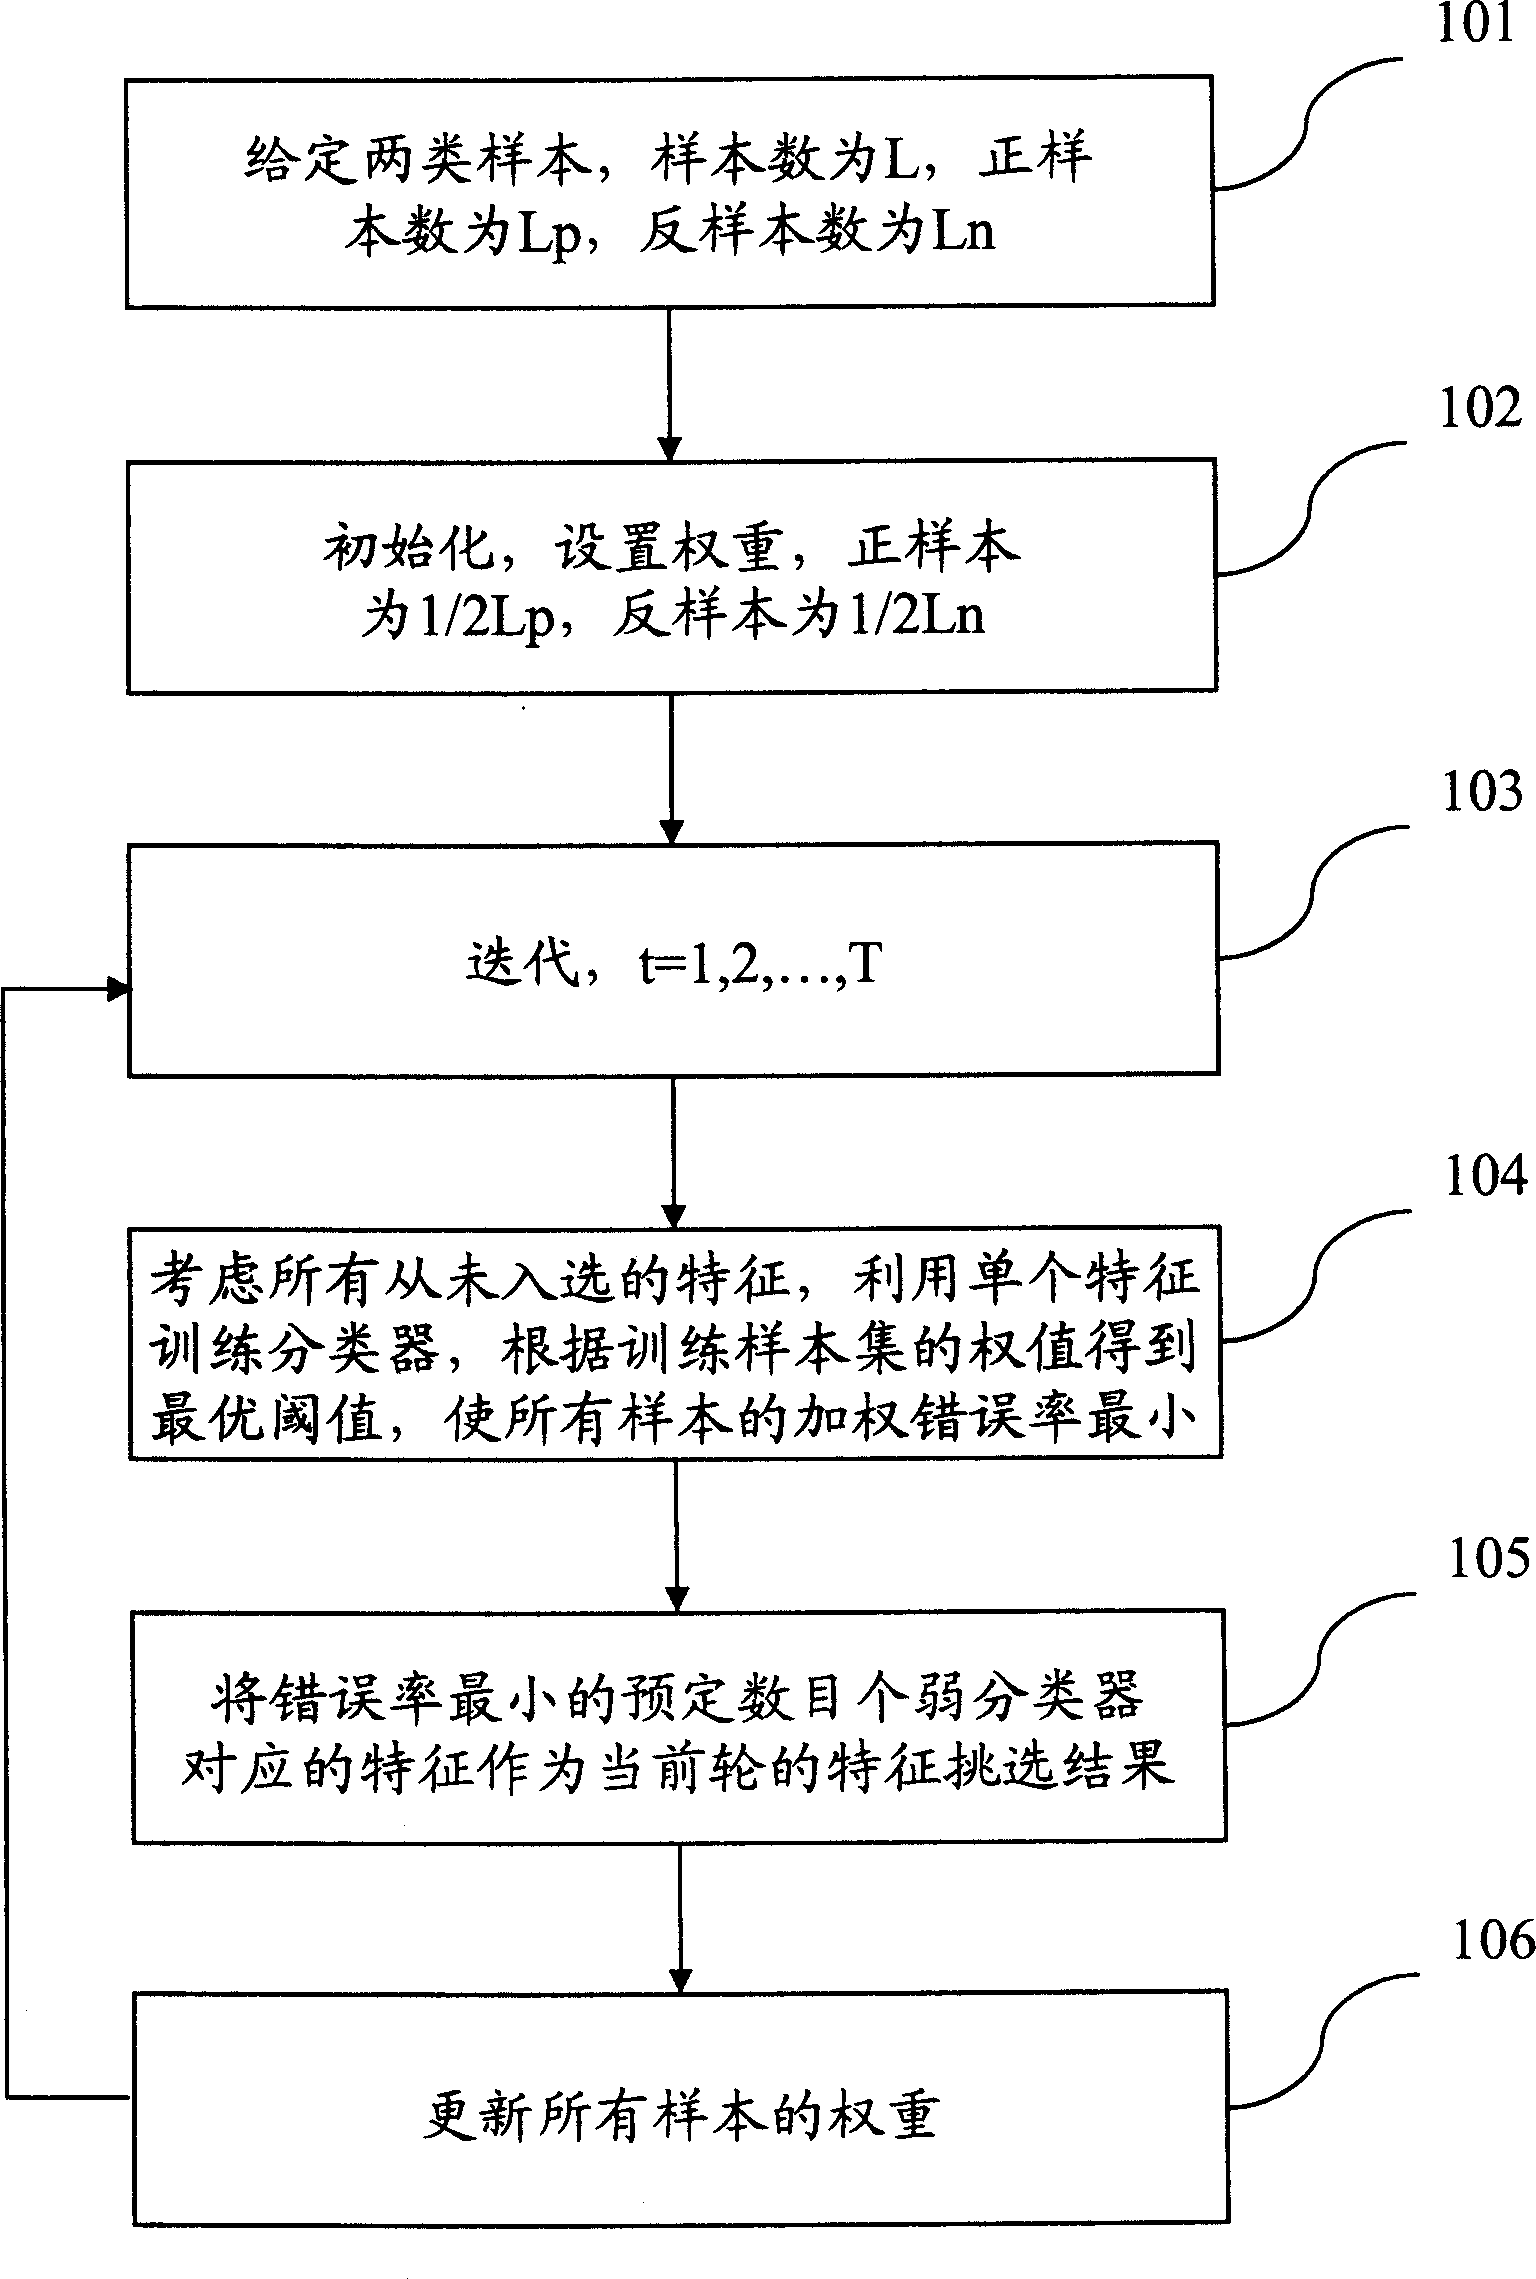 AdaBoost based characteristic extracting method for pattern recognition